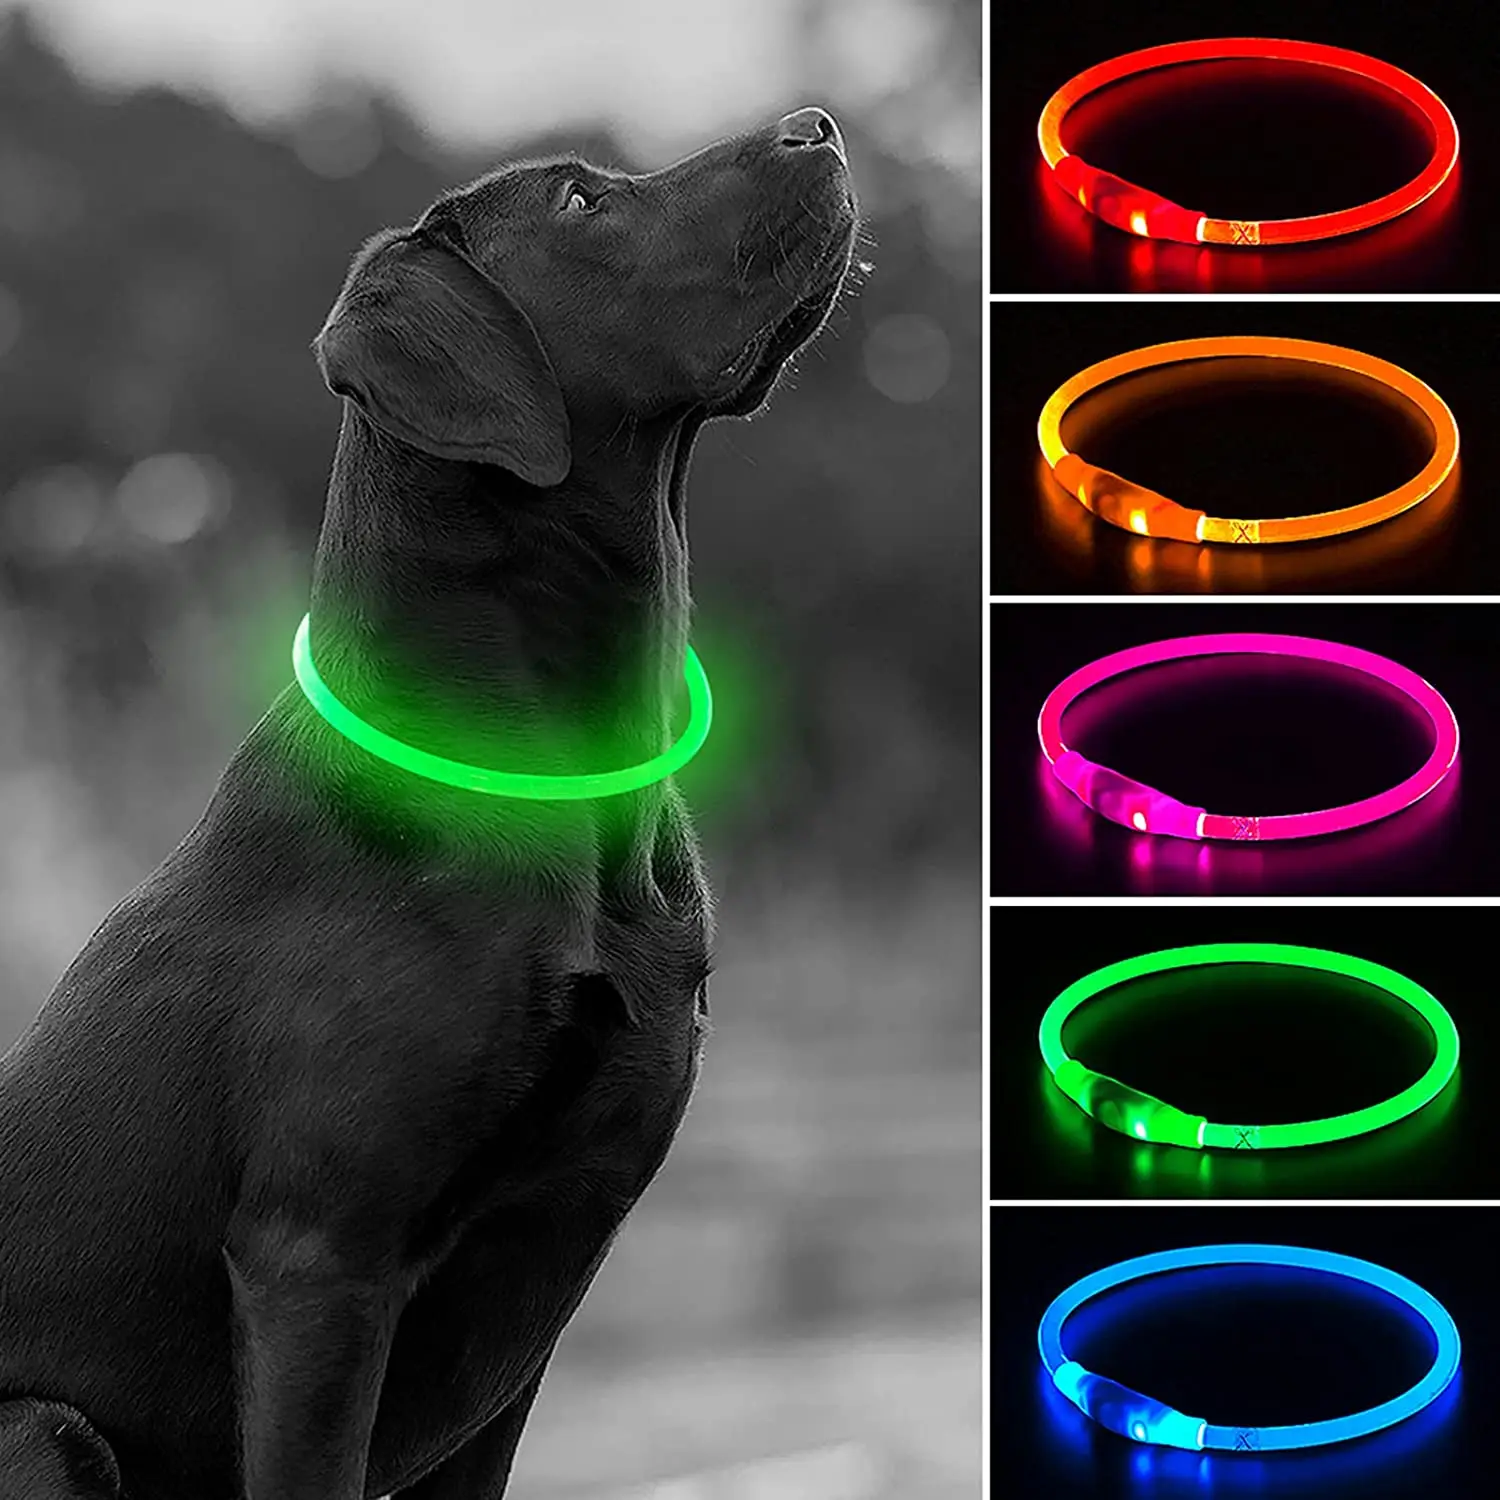 LED Dog Collar Light, USB Rechargeable Glowing Pet Collar, Silicone Flashing Pet Necklace Safety Collars for Dogs Night Walking